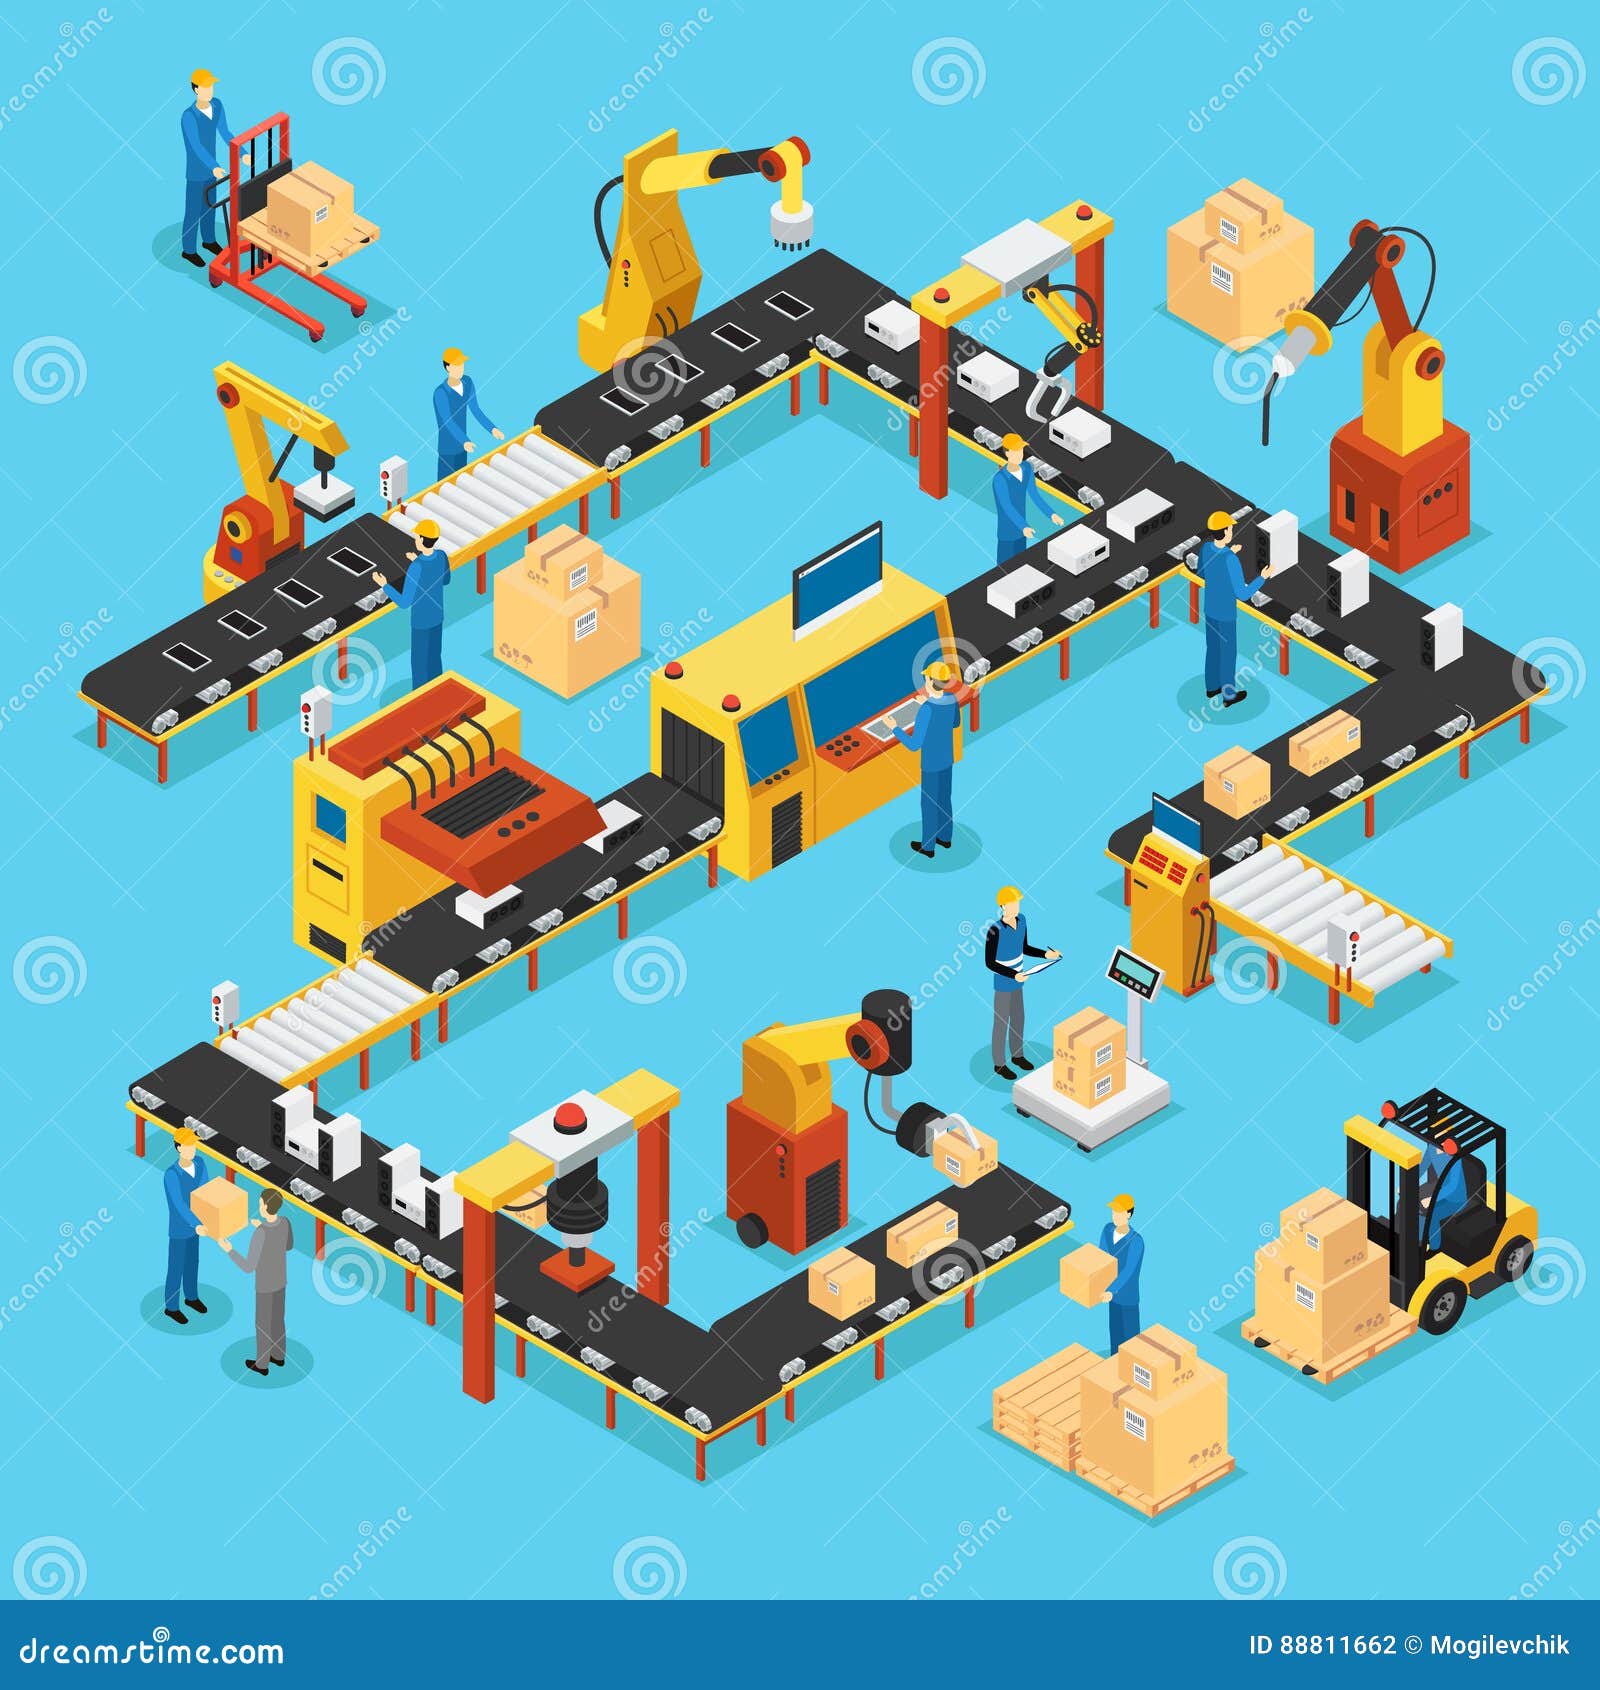 isometric automated production line concept